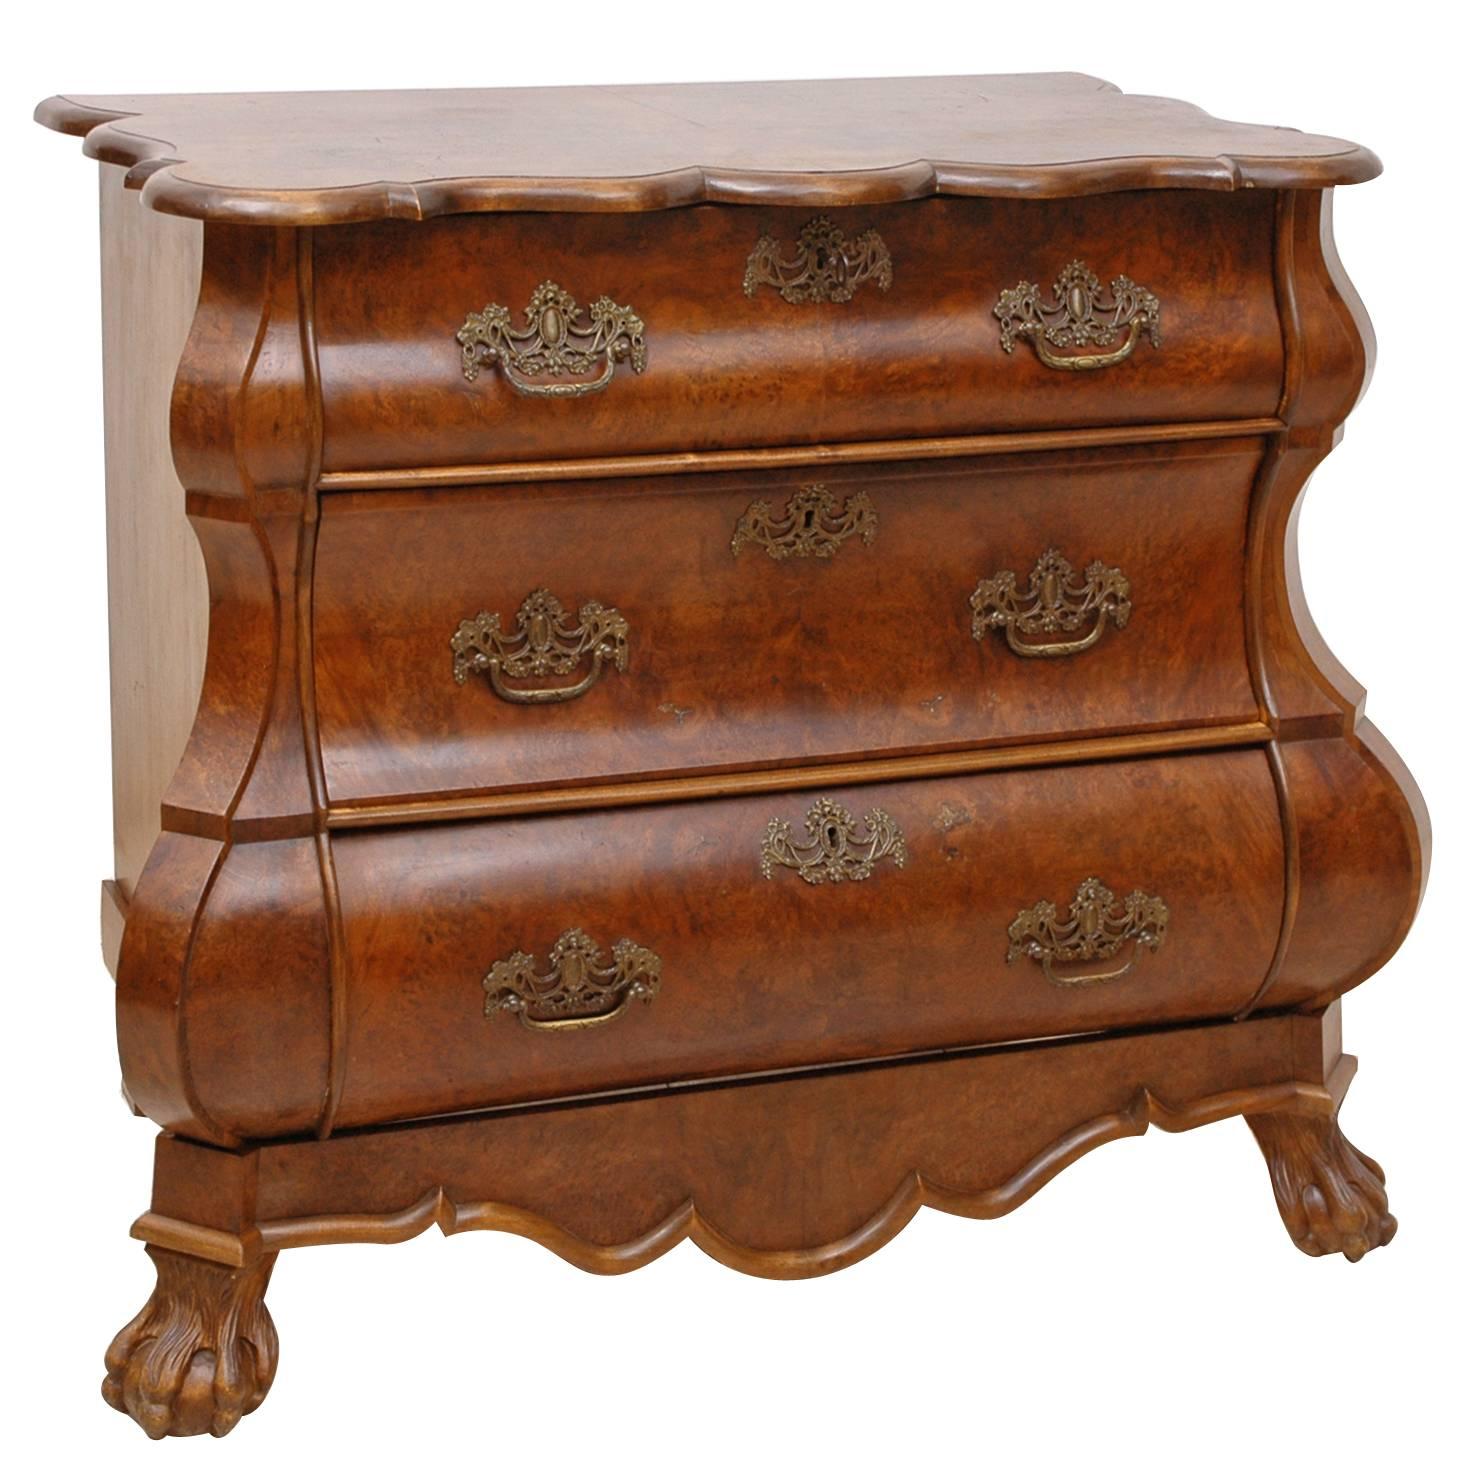 Dutch Antique 19th Century Baroque Revival Bombe Chest of Drawers in Walnut